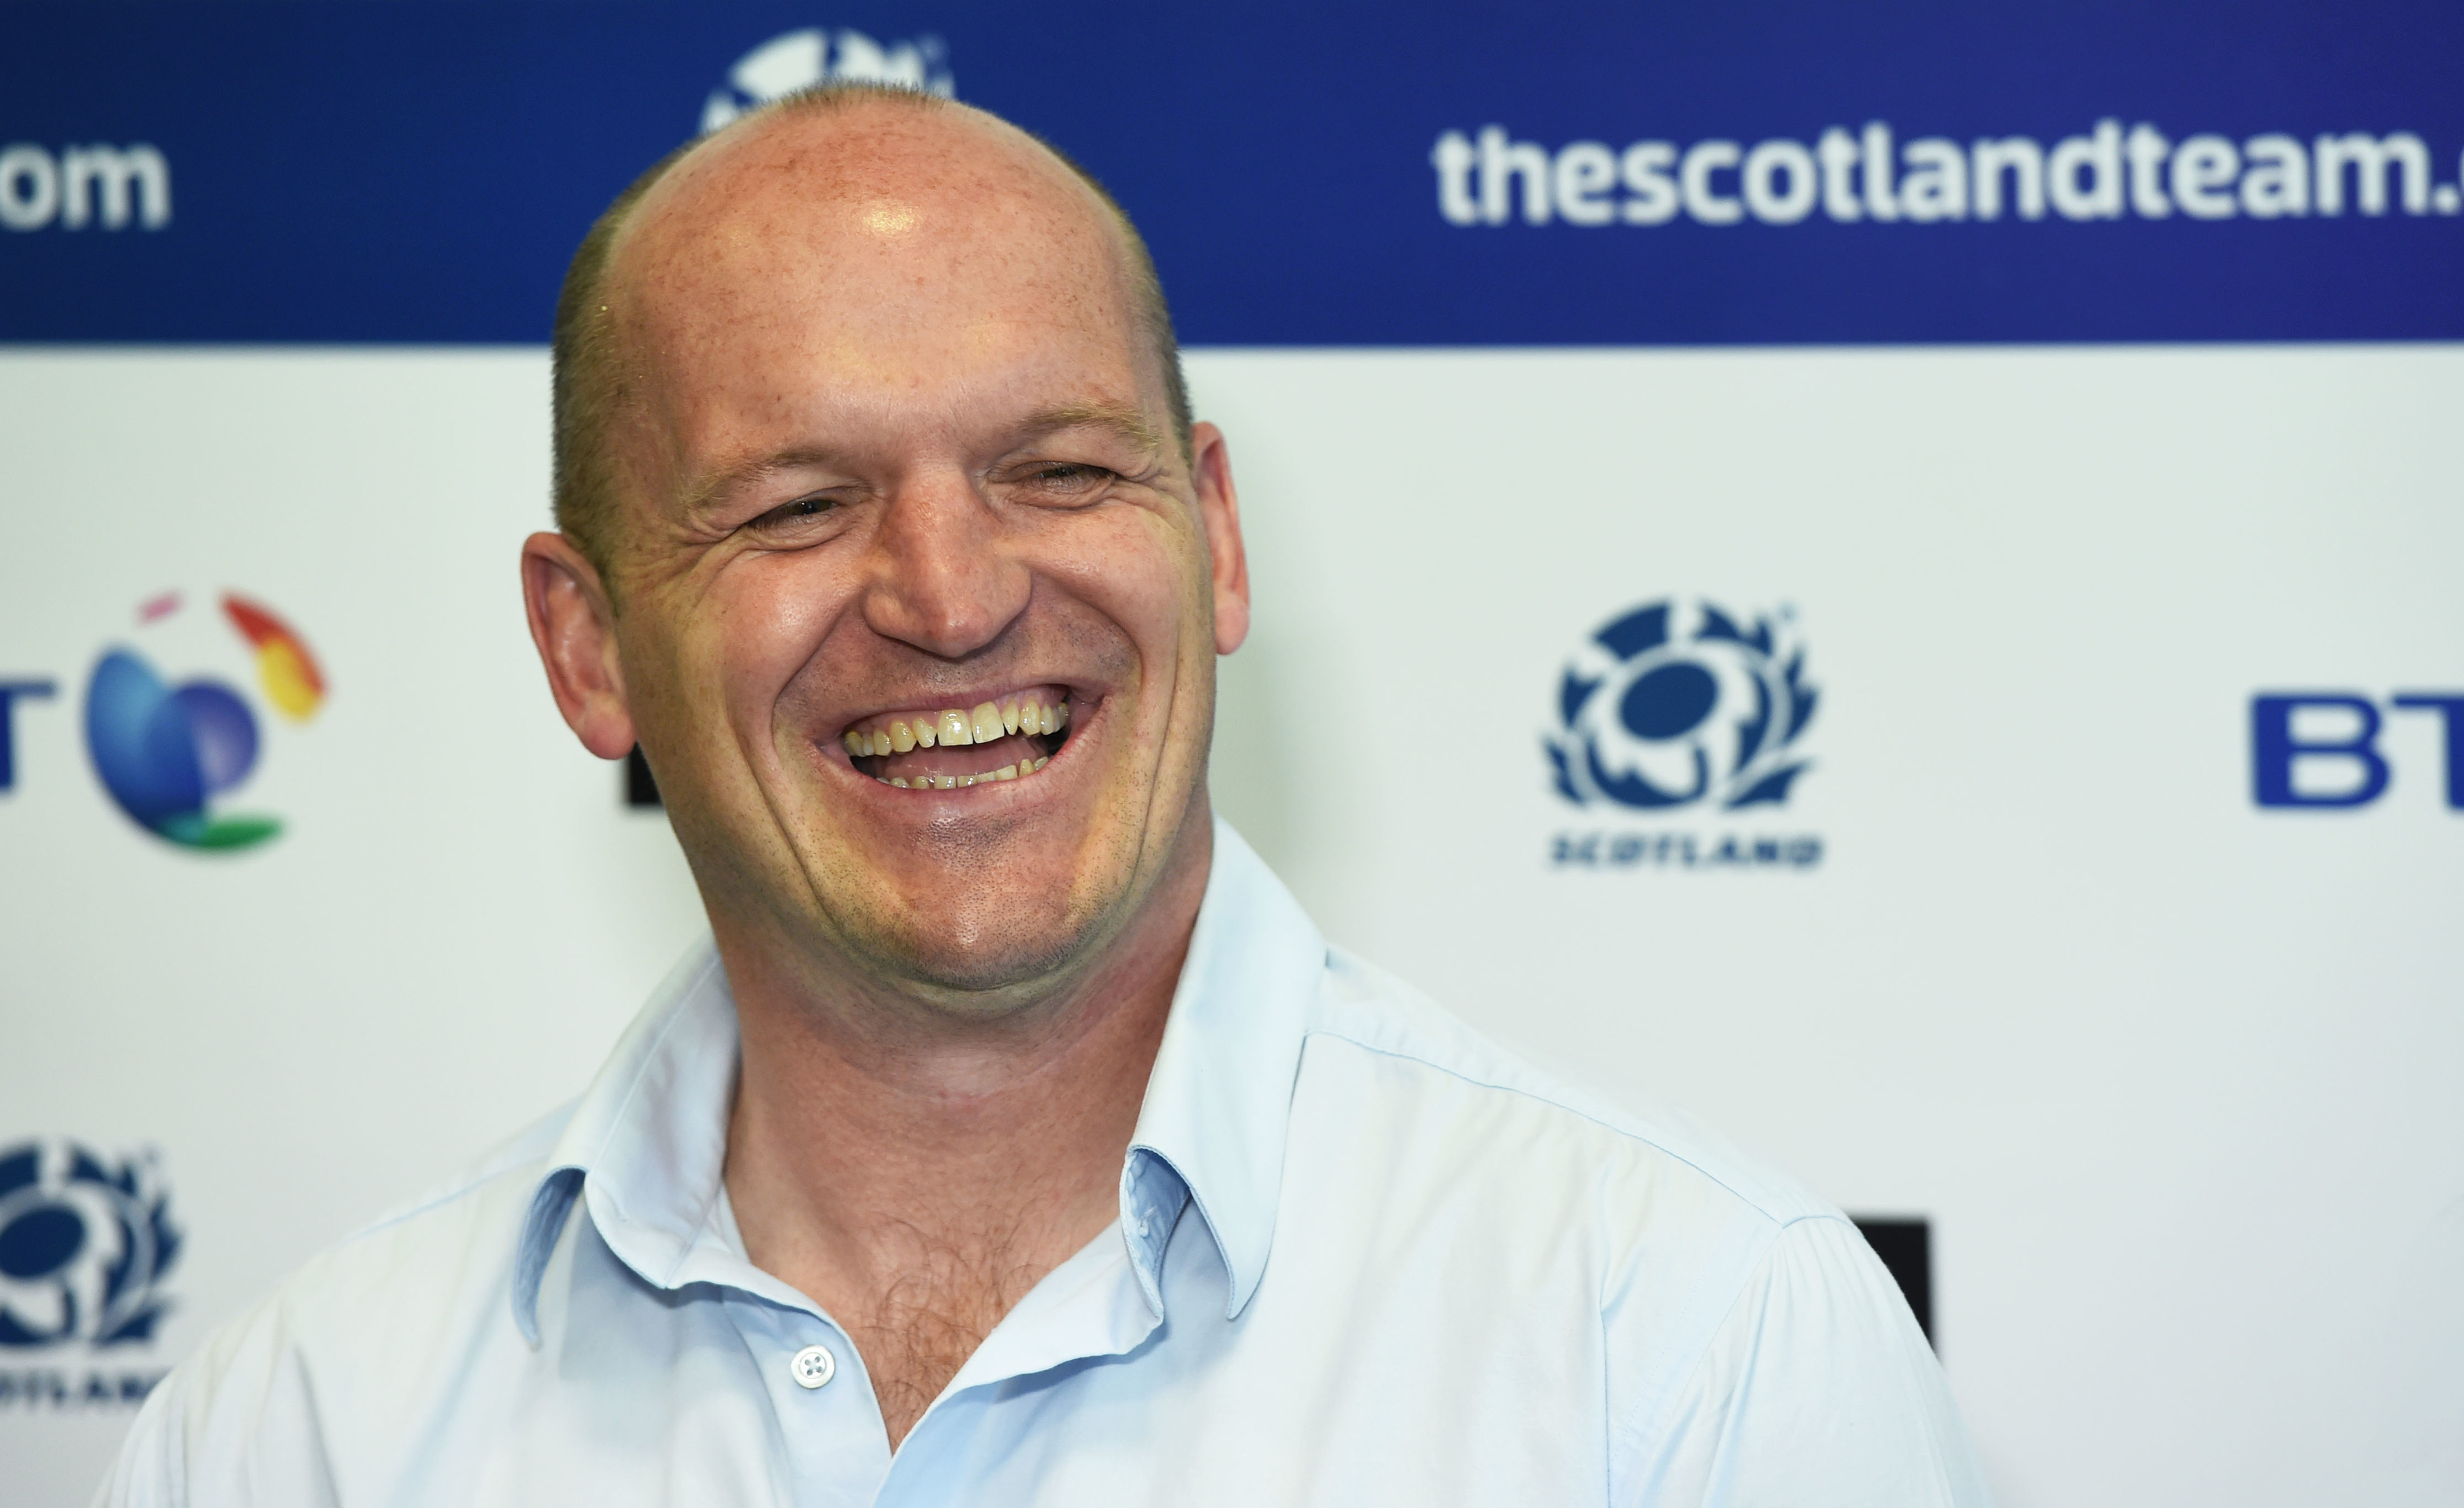 Gregor Townsend will send Scots to the Lions from his summer tour squad "with our blessing" should they be required.